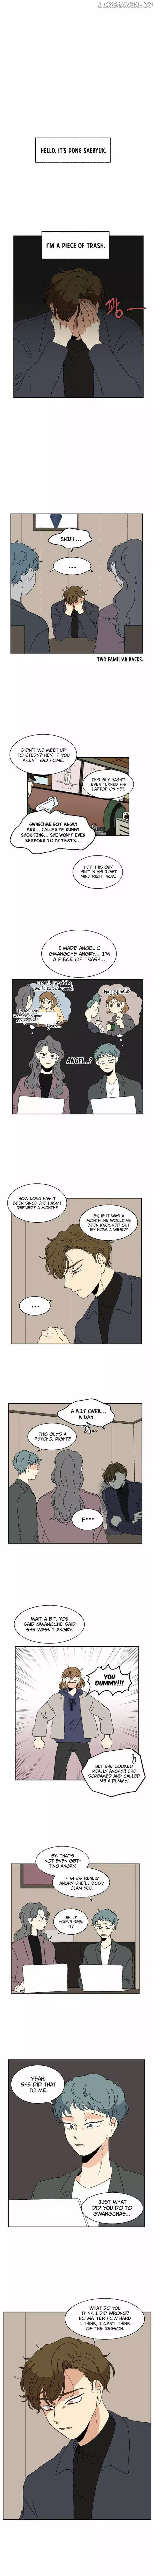 Daybreaking Romance - 61 page 6-fbccf0ea